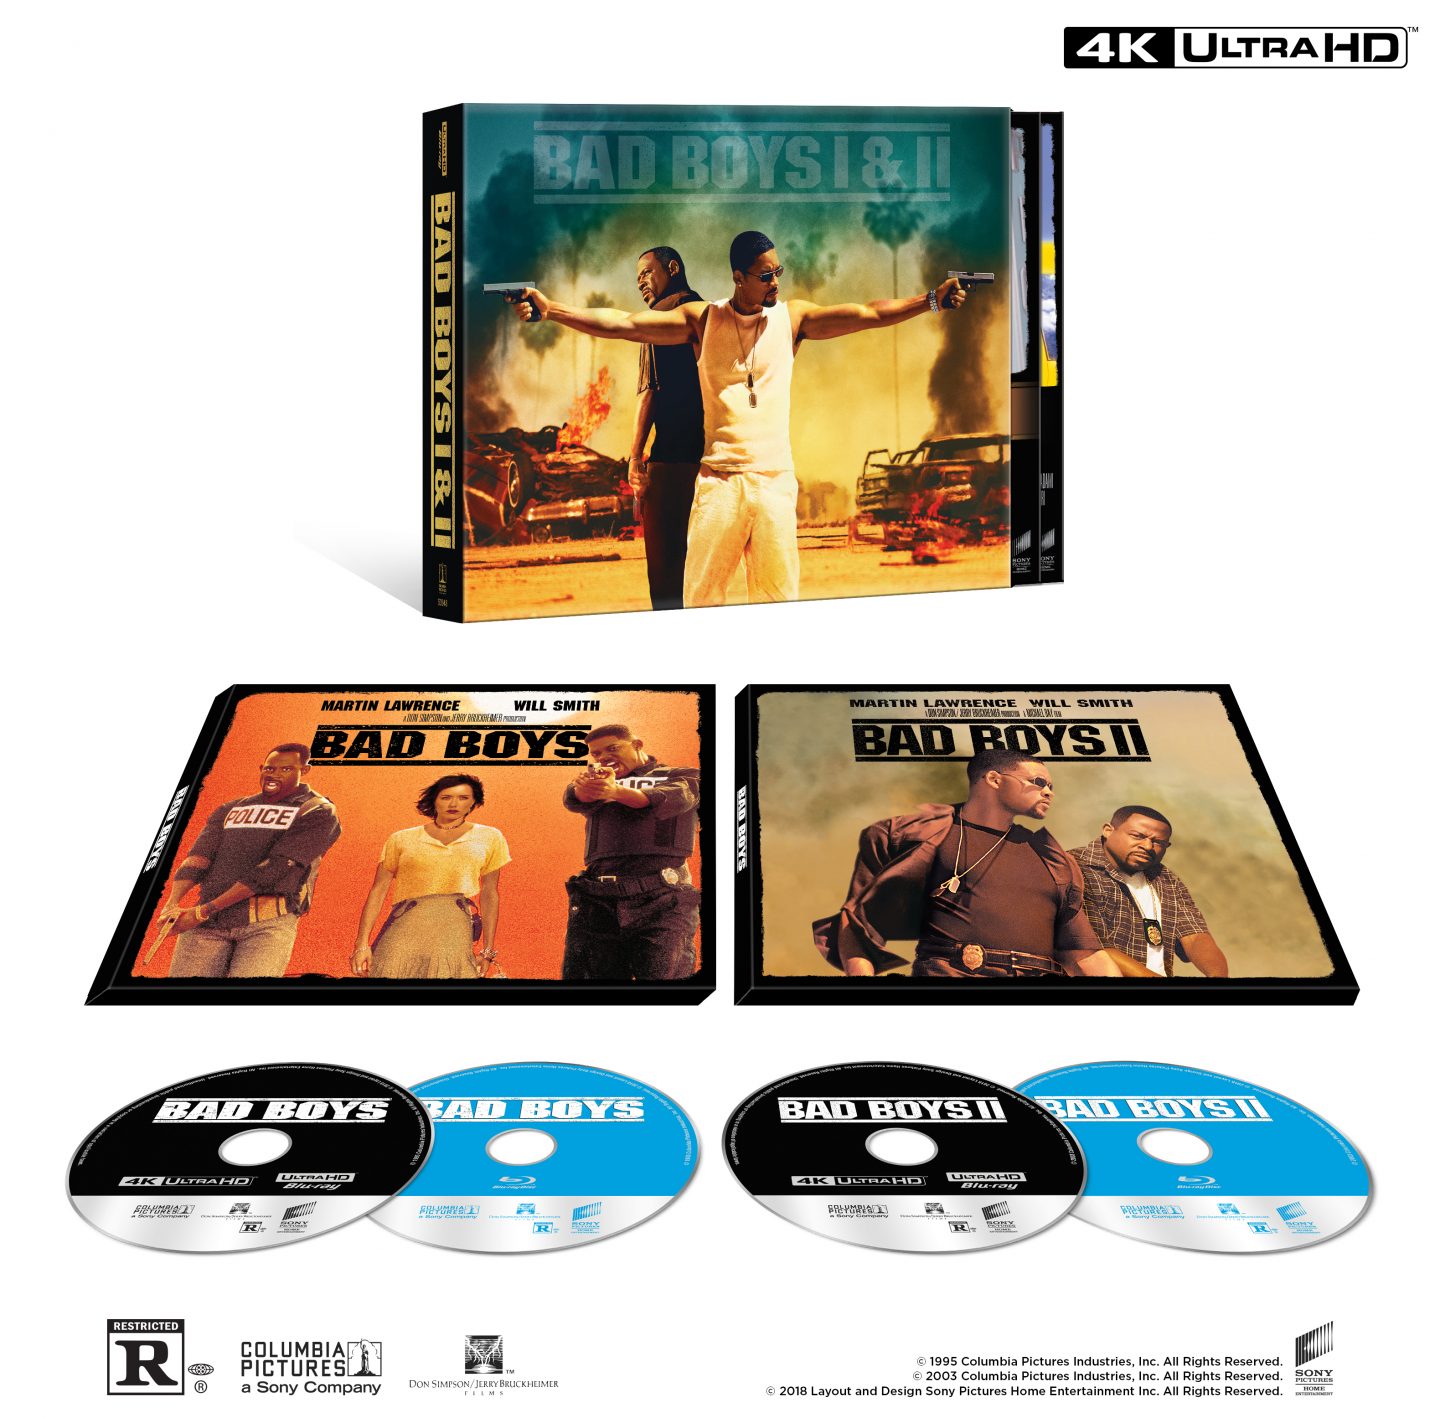 Bad Boys Collection 4K UHD (Sony Pictures Home Entertainment